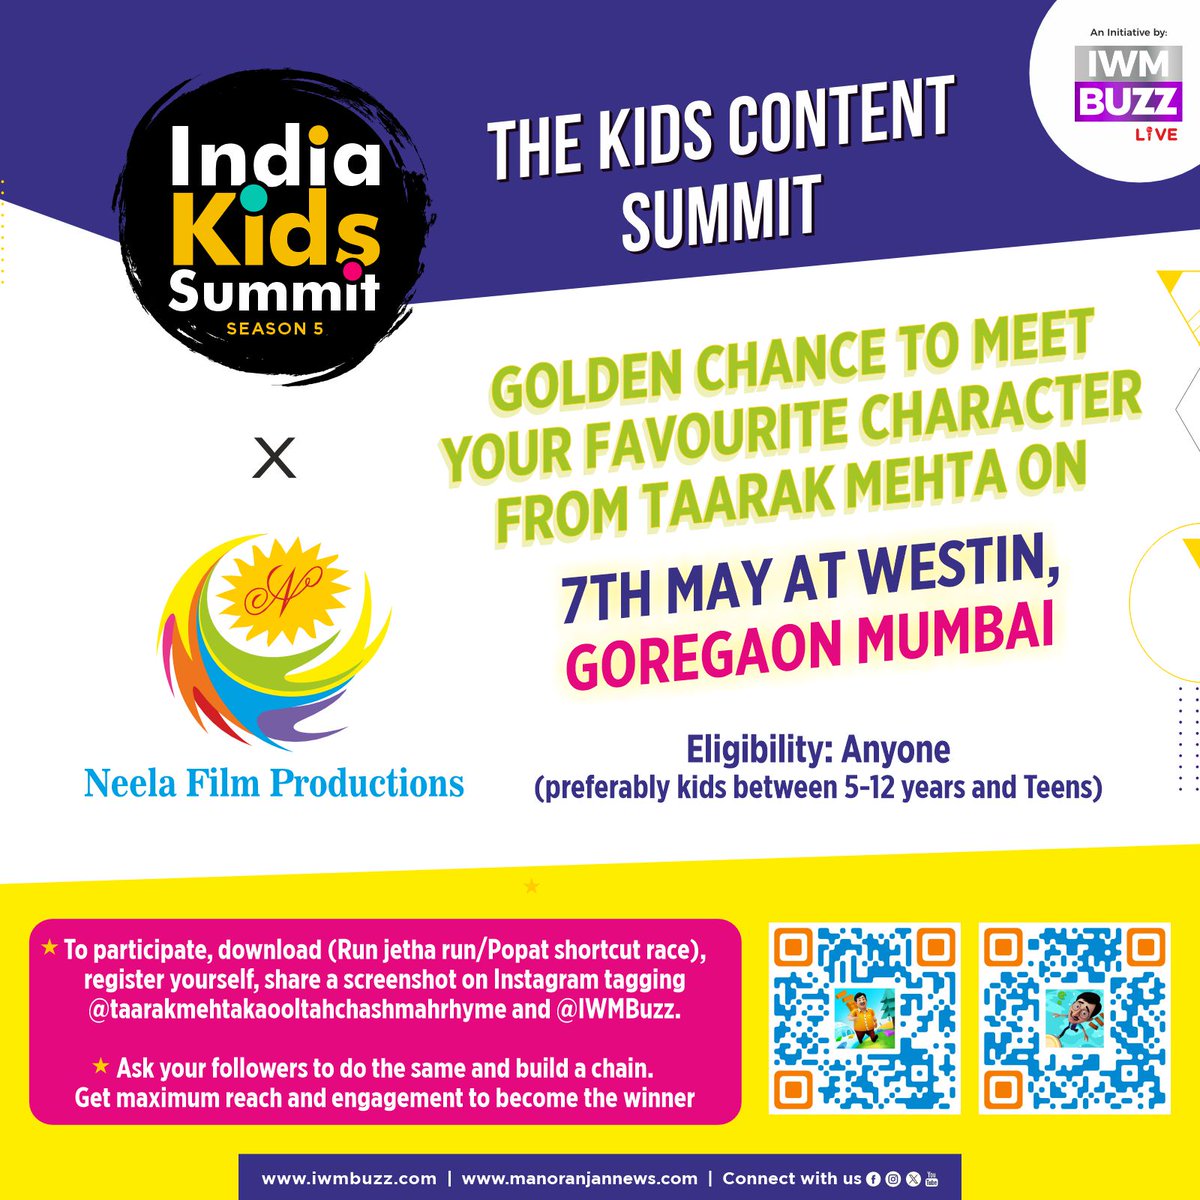 Contest Alert: India Kids Summit x Neela Productions Follow these simple steps mentioned below and get a chance to meet your favourites Hurry up : Participate Now #Indiakidssummit #iwmbuzz #neelafilmproductions #contestalert #taarakmehta @TMKOC_NTF